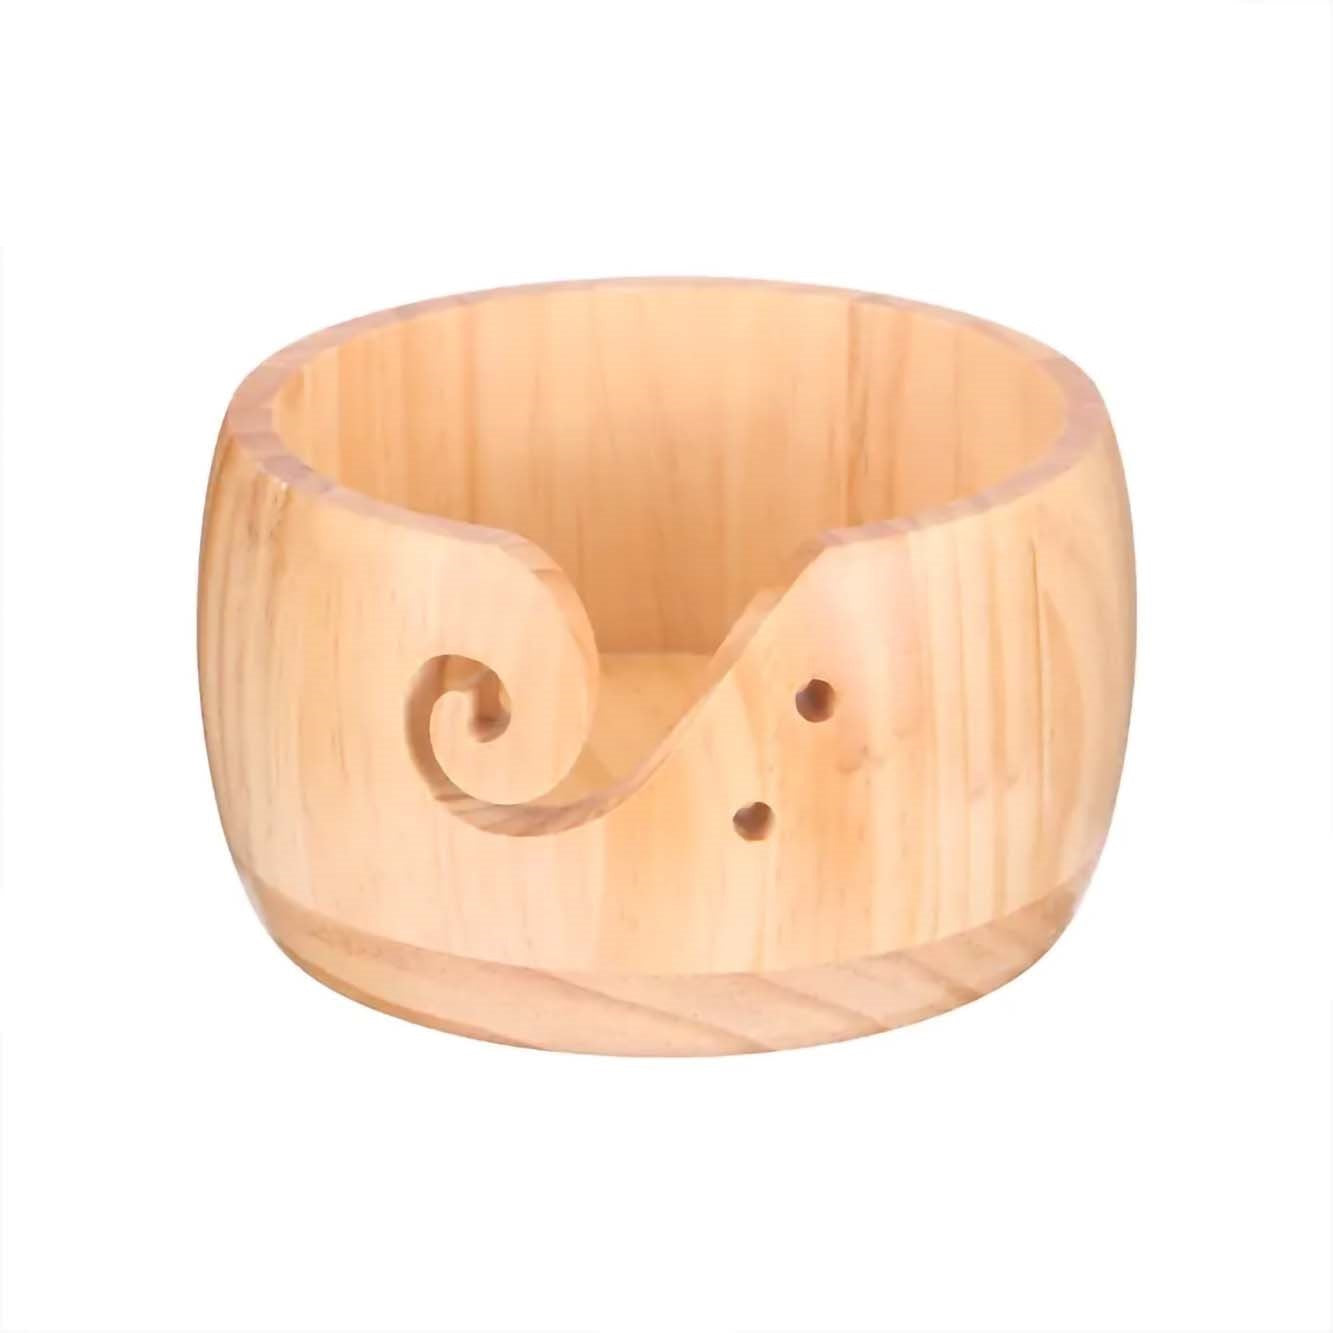 Handcrafted wooden yarn bowl with a curled design and two small holes, isolated on a white background.